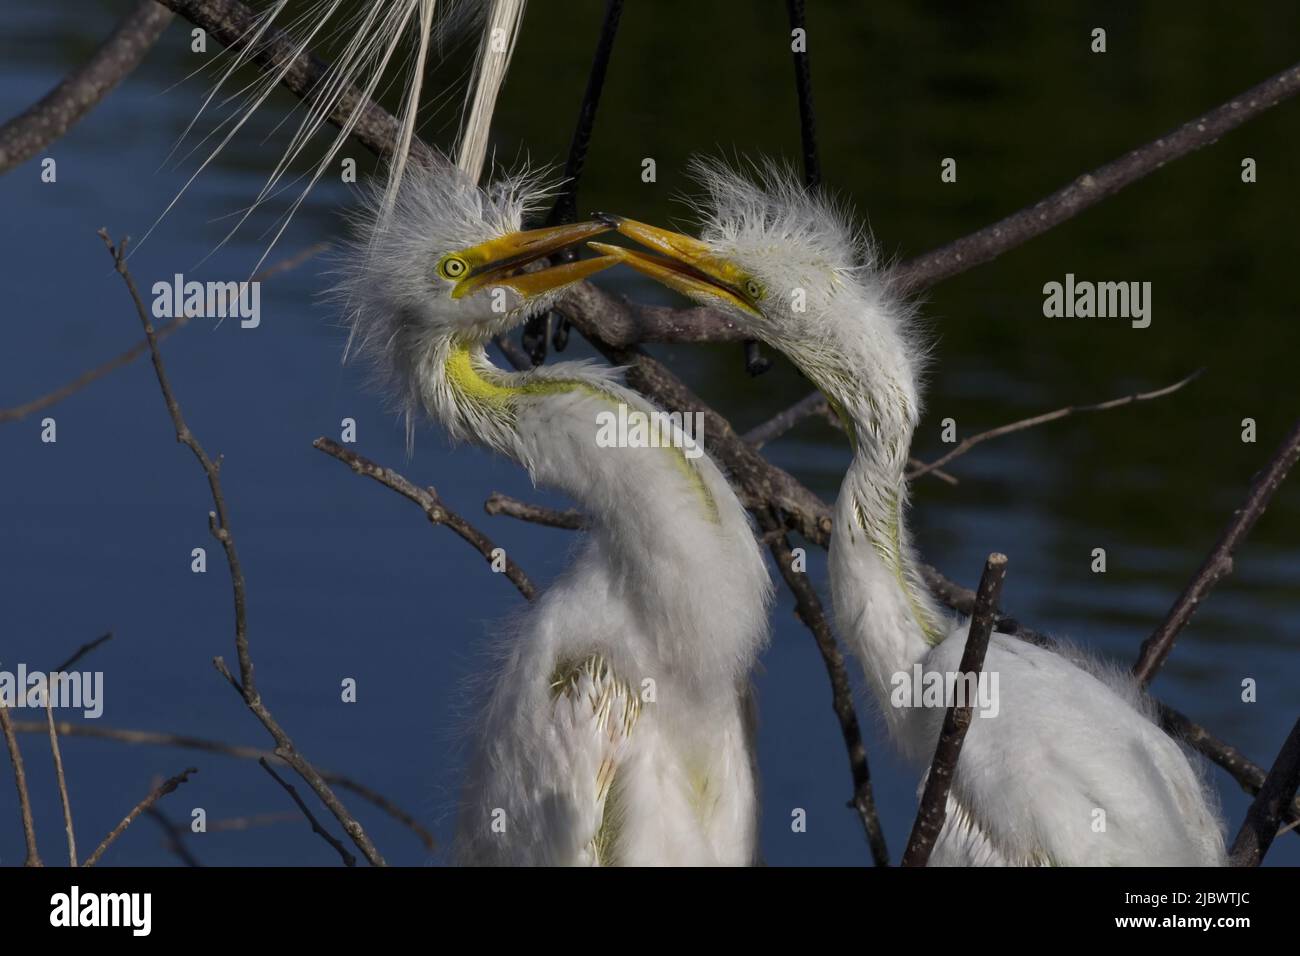 Two egret chicks cross beaks in natural competition and play in nest of Wakohadatchee Wetlands in Delray Beach, Florida Stock Photo